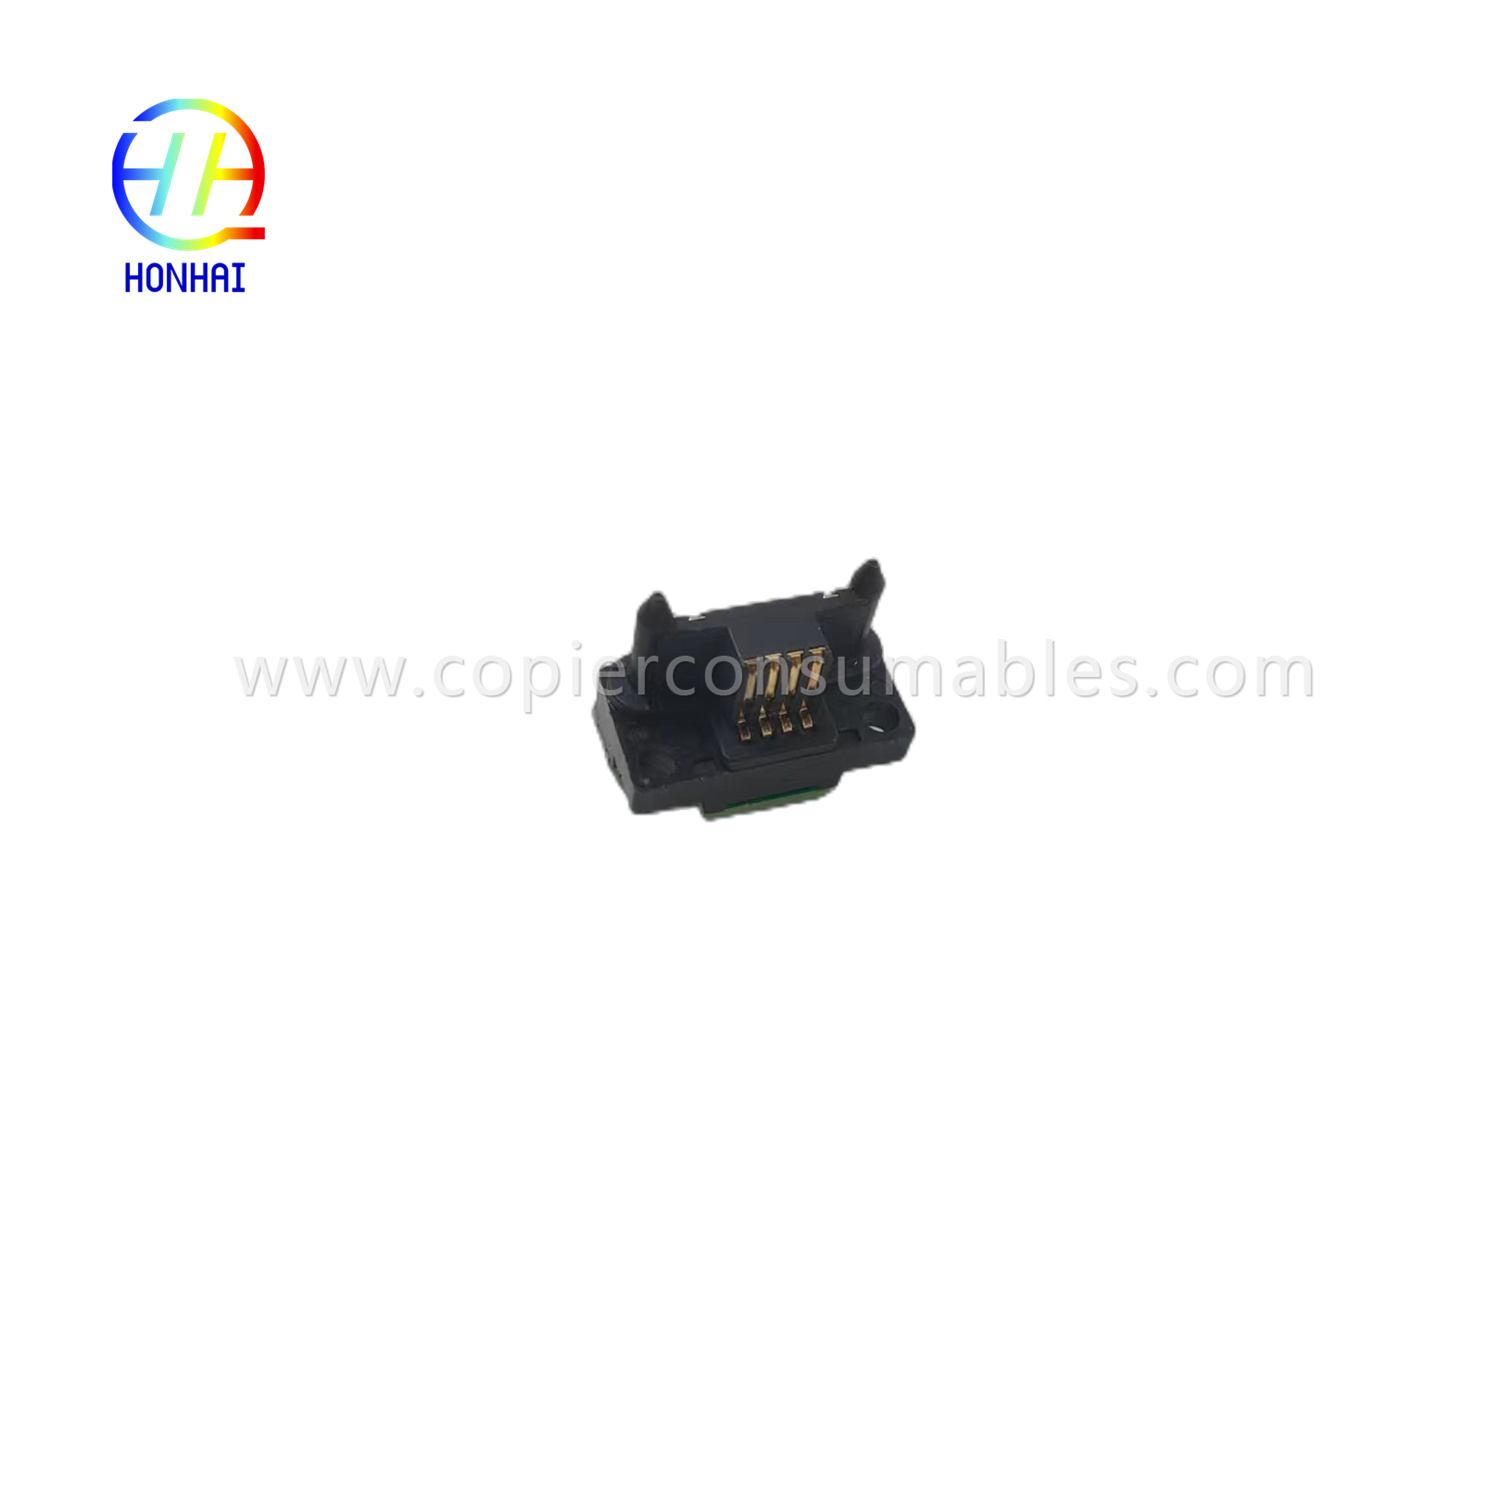 Chip bębna do Xerox 113R00673 113R673 Workcentre 5755 5875 5865 5845 5855 5875 5890 Chip (1)_副本